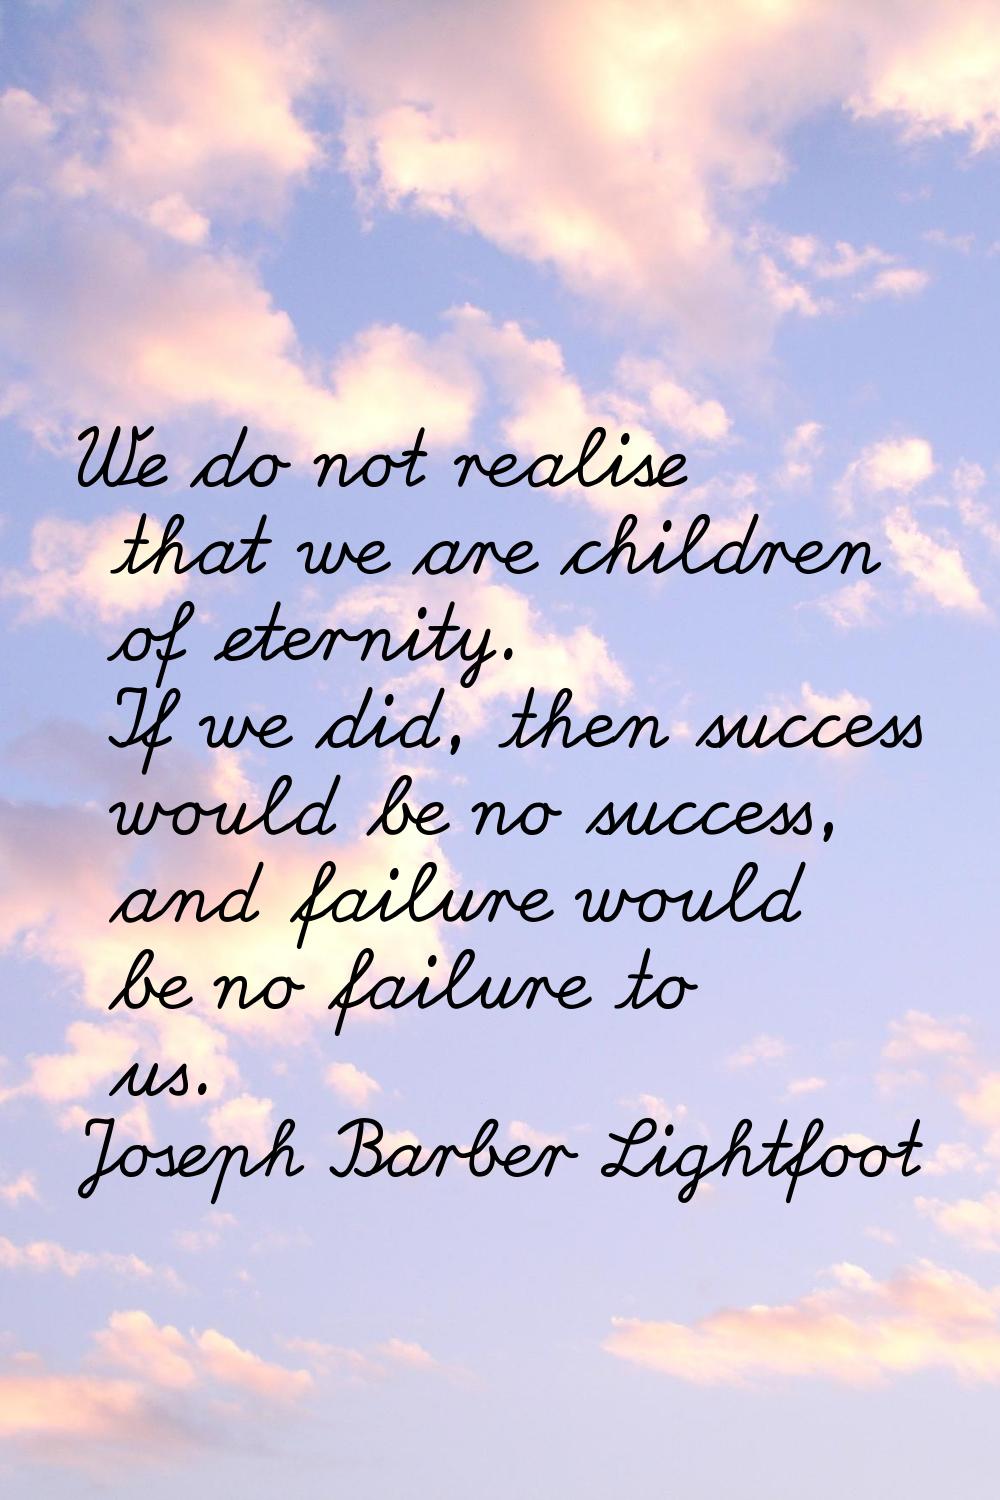 We do not realise that we are children of eternity. If we did, then success would be no success, an